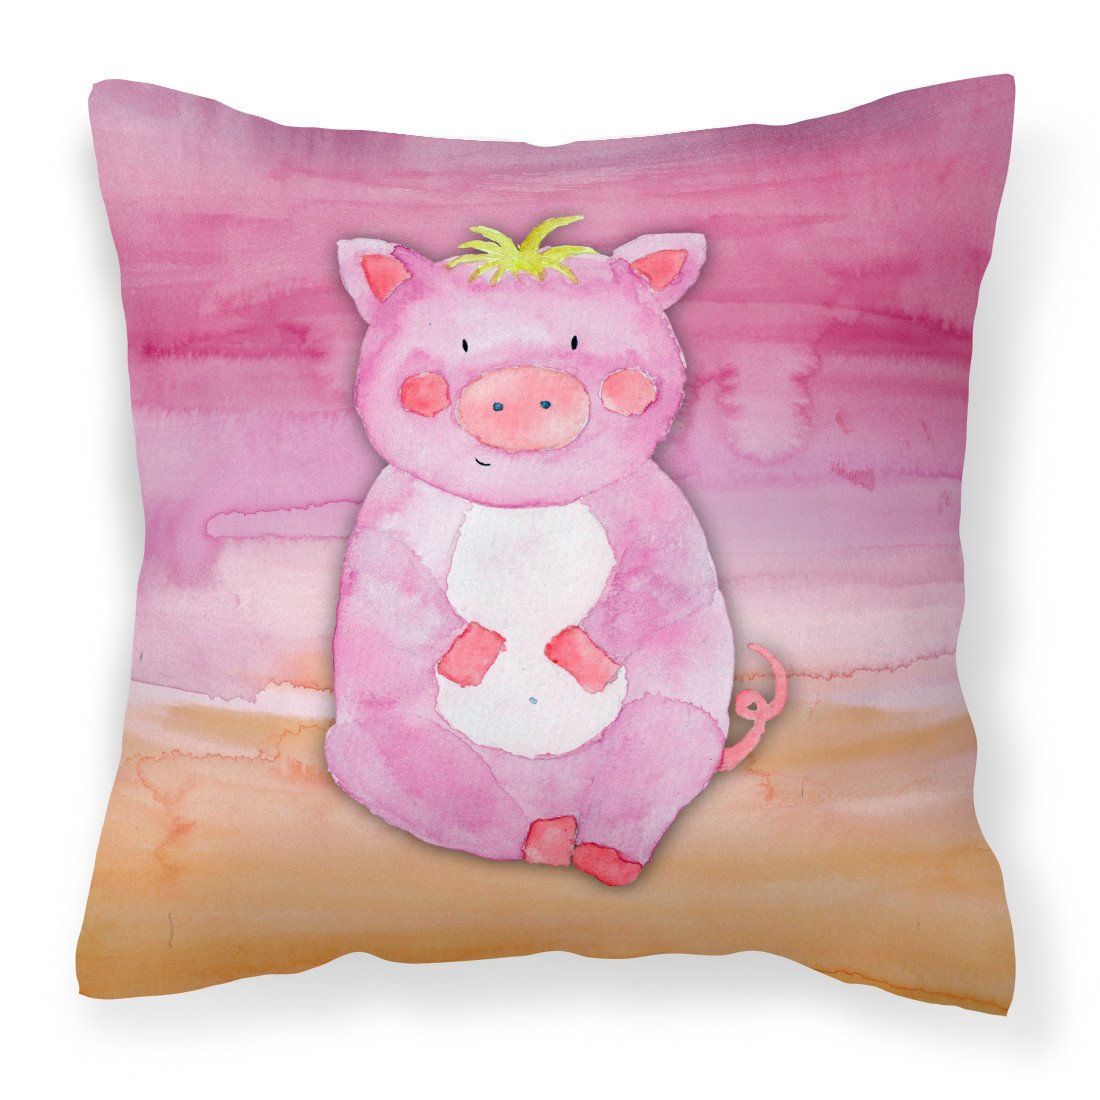 Pig Watercolor Fabric Decorative Pillow BB7416PW1818 by Caroline's Treasures